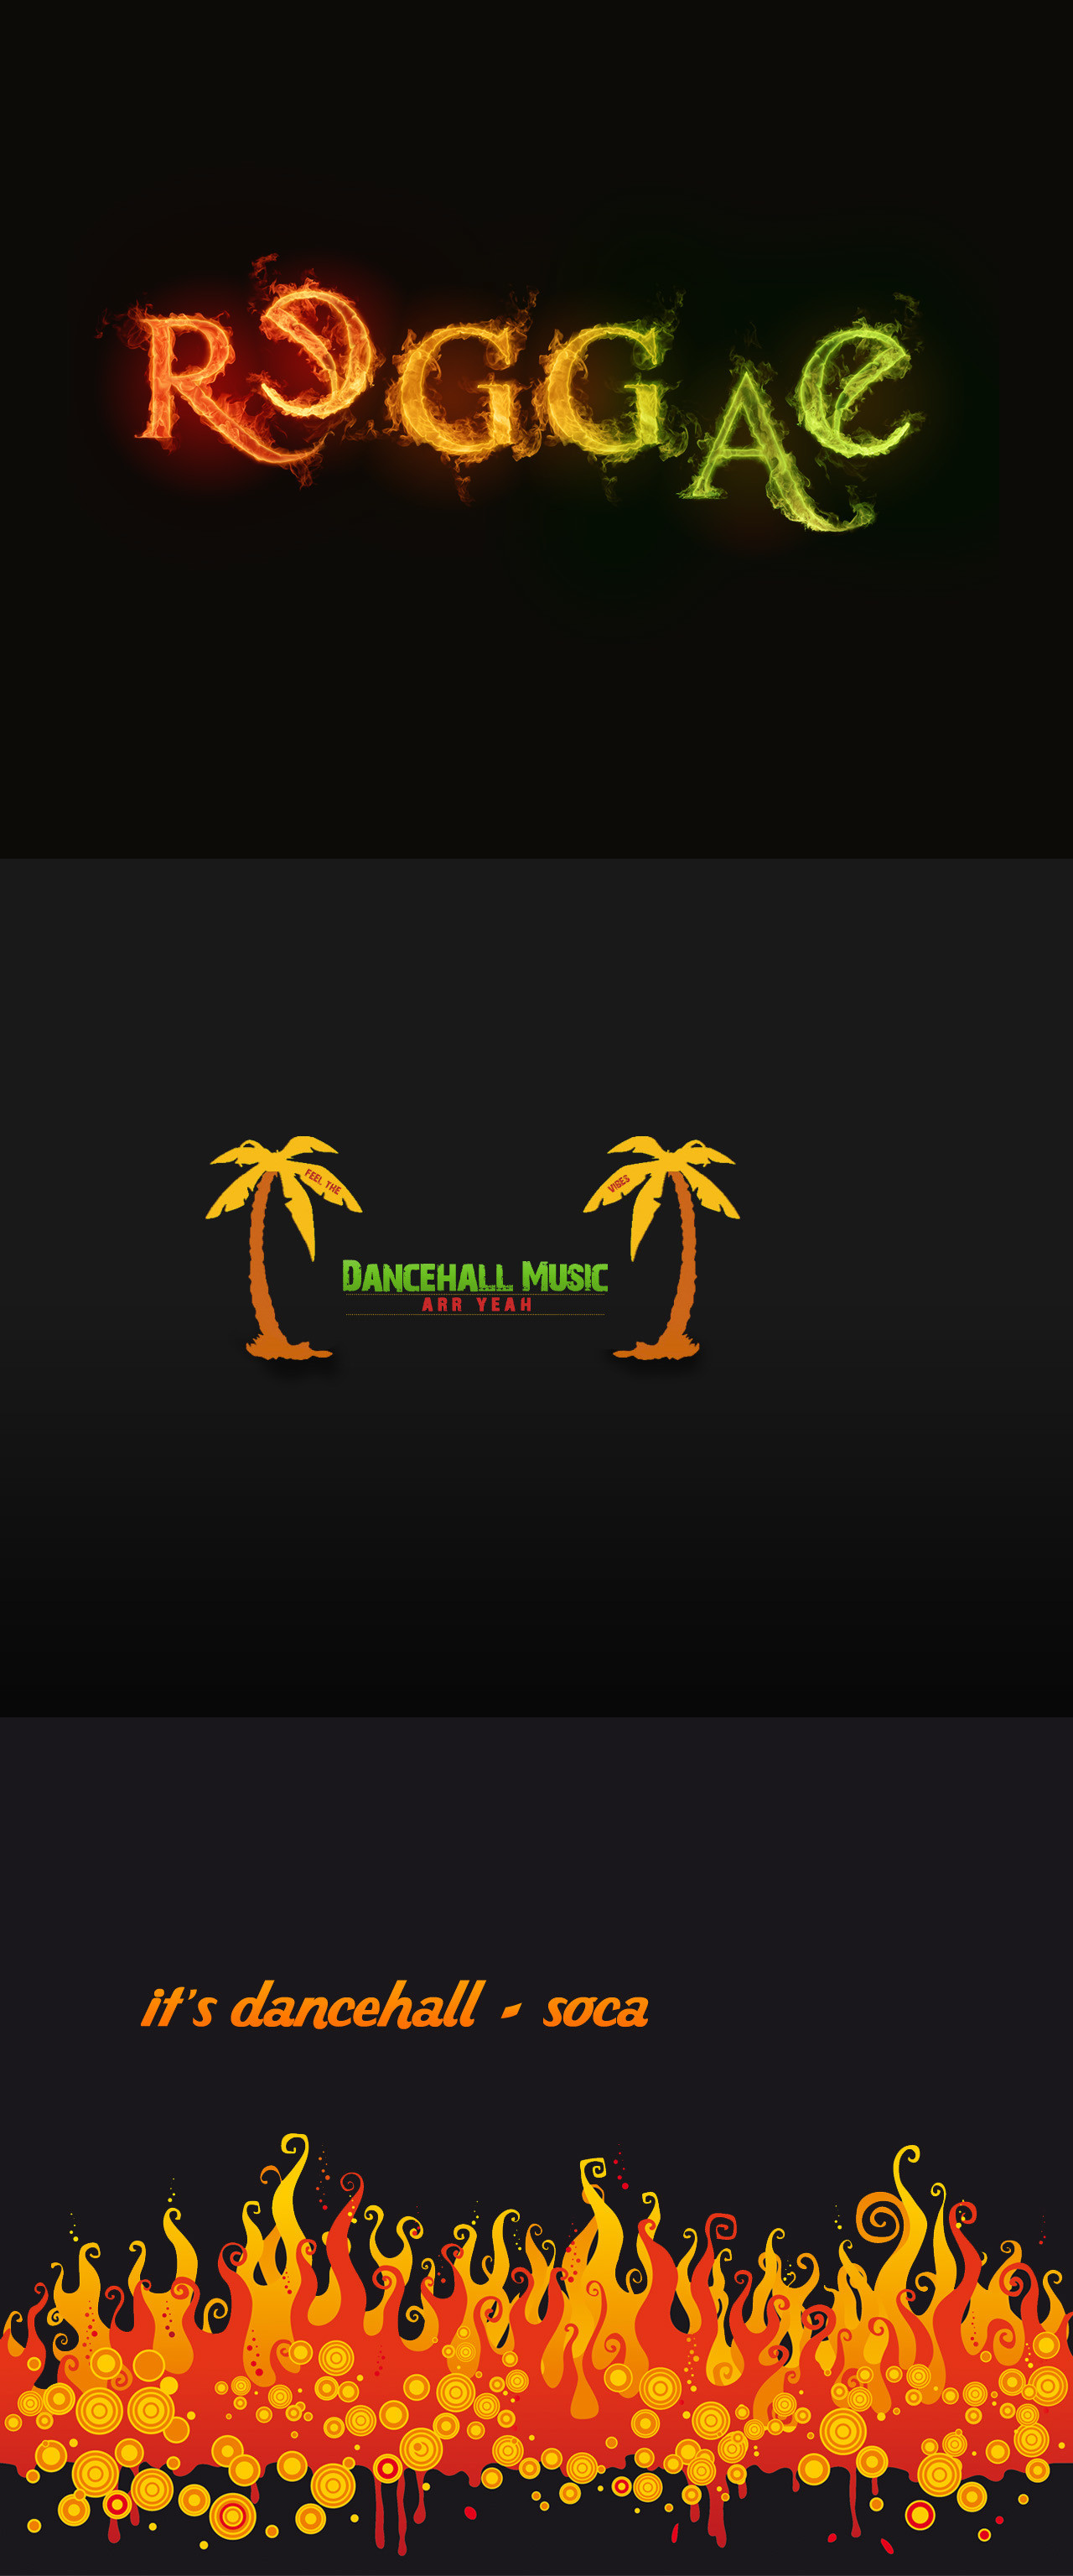 1280x3072 ... Dancehall and Reggae Wallpaper by Marchibial-Arts